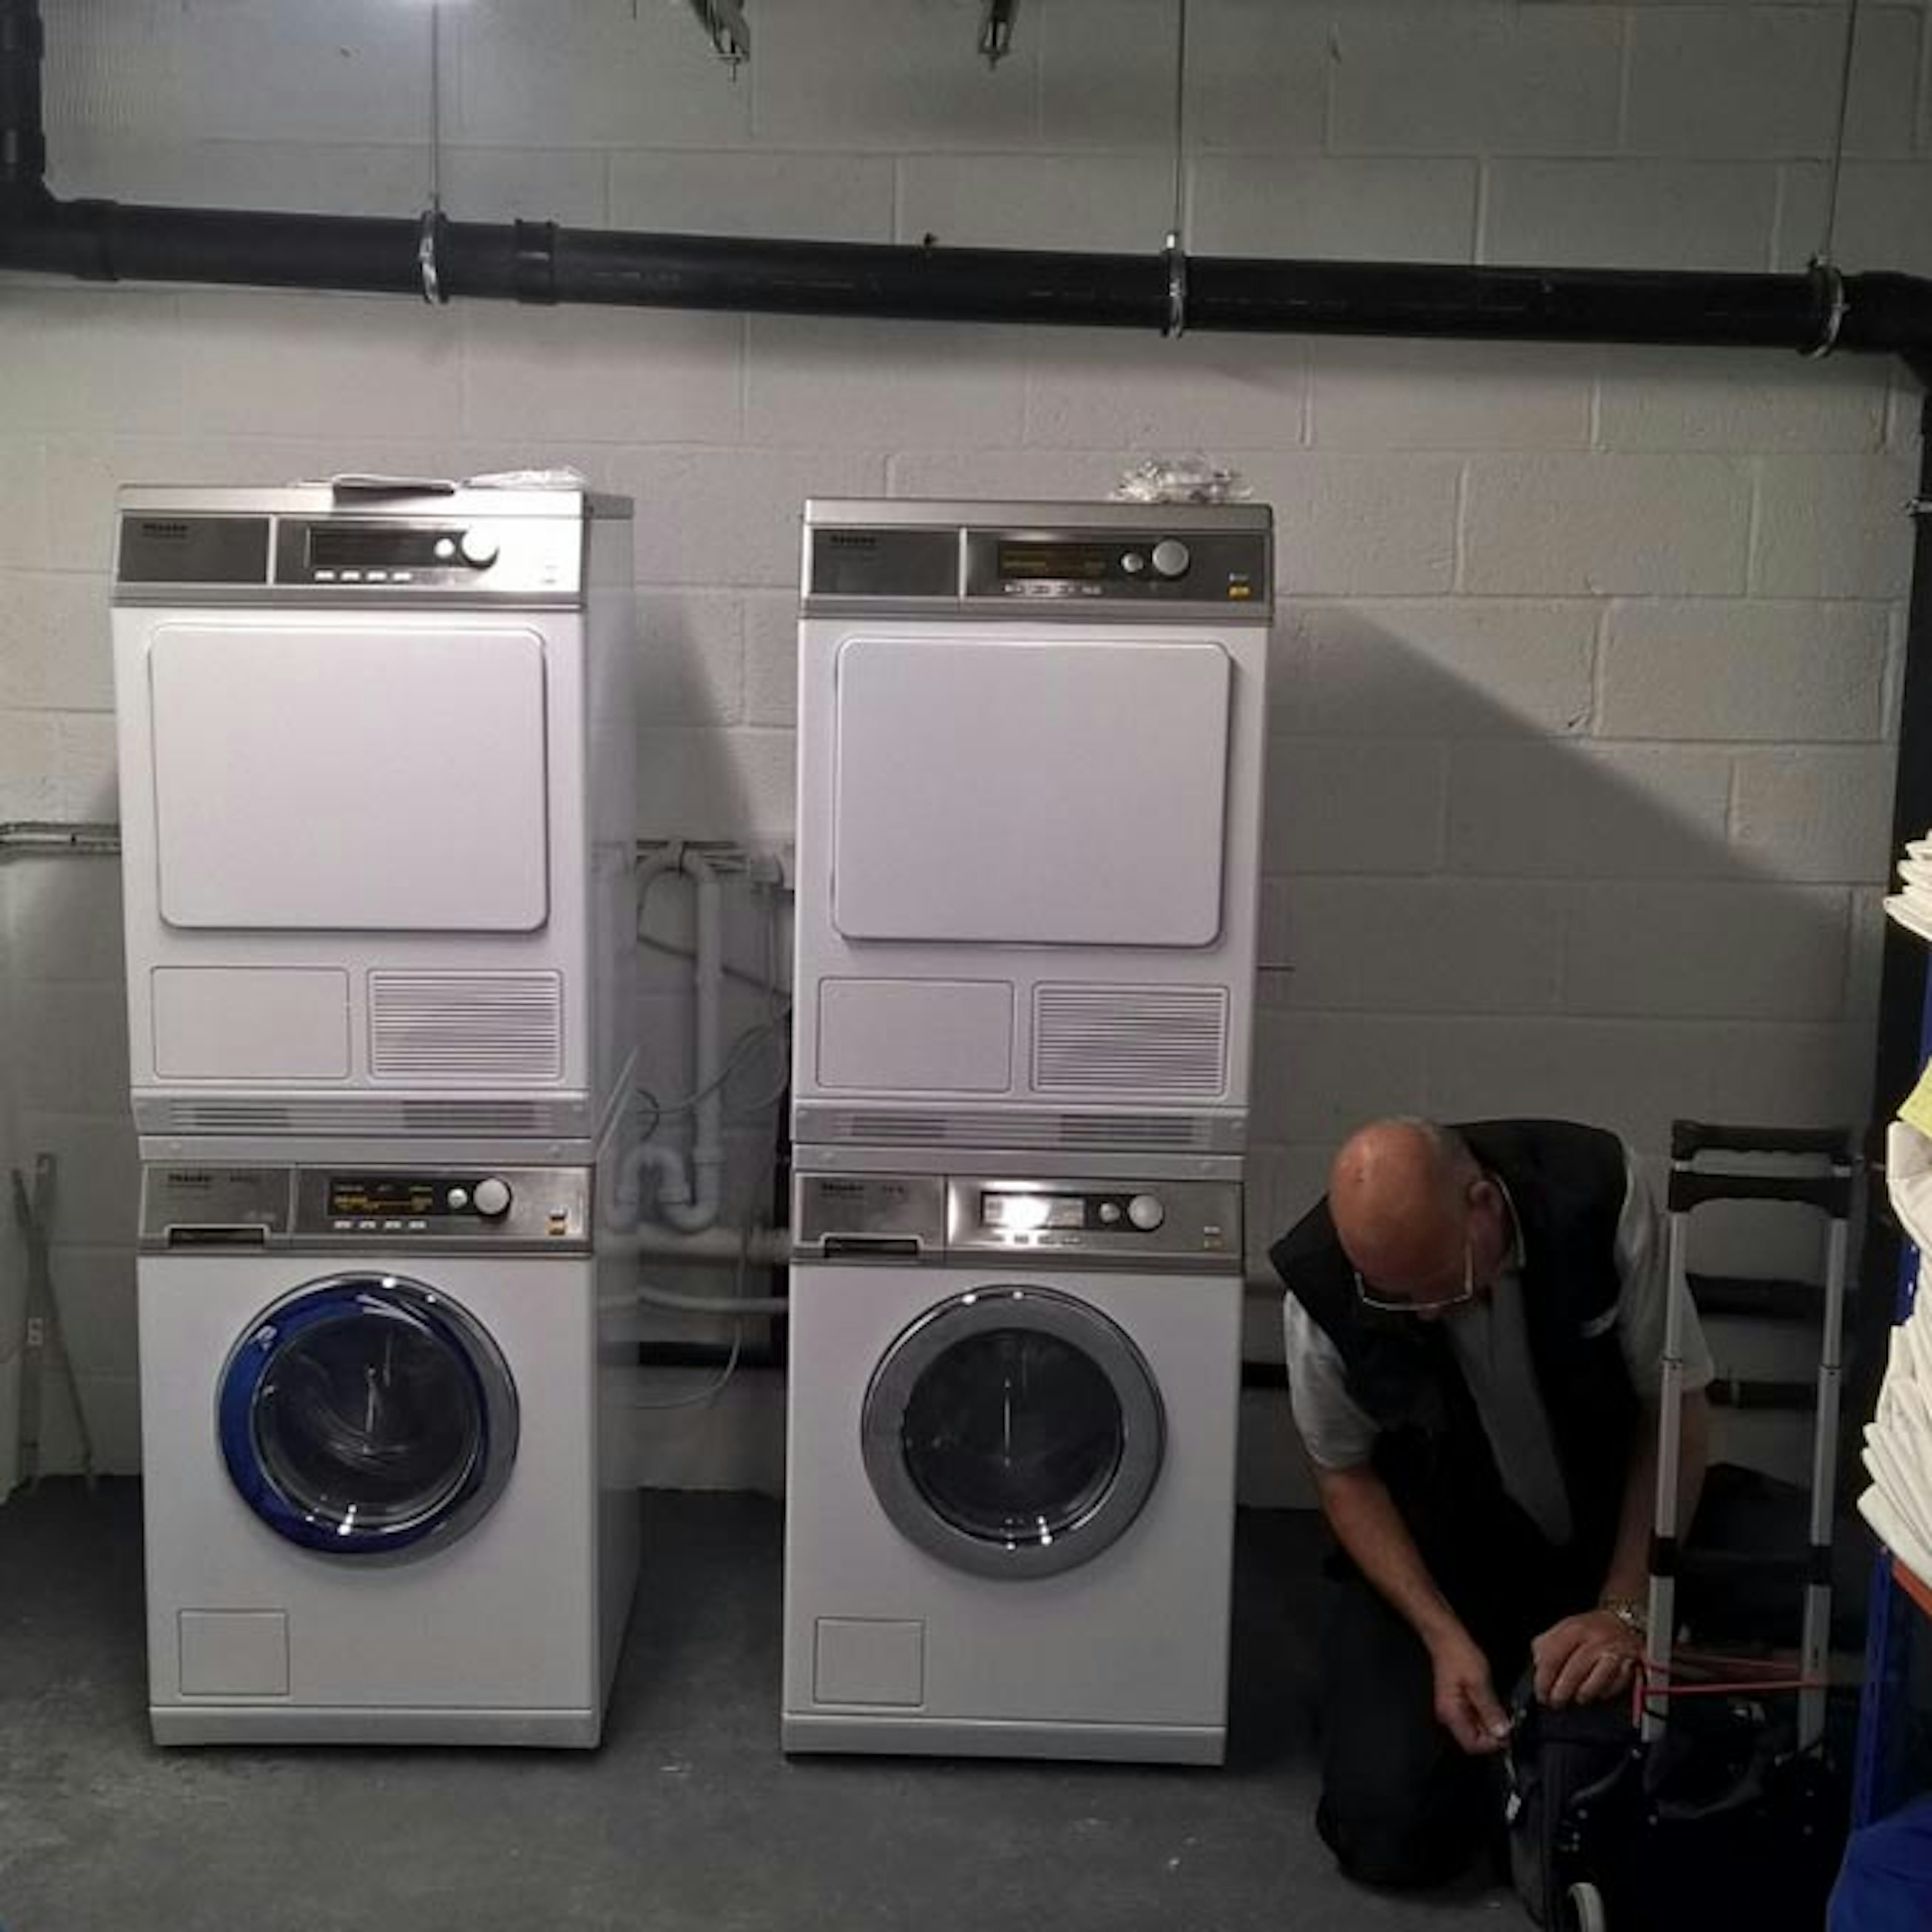 Engineer kneeling next to commercial washing machines